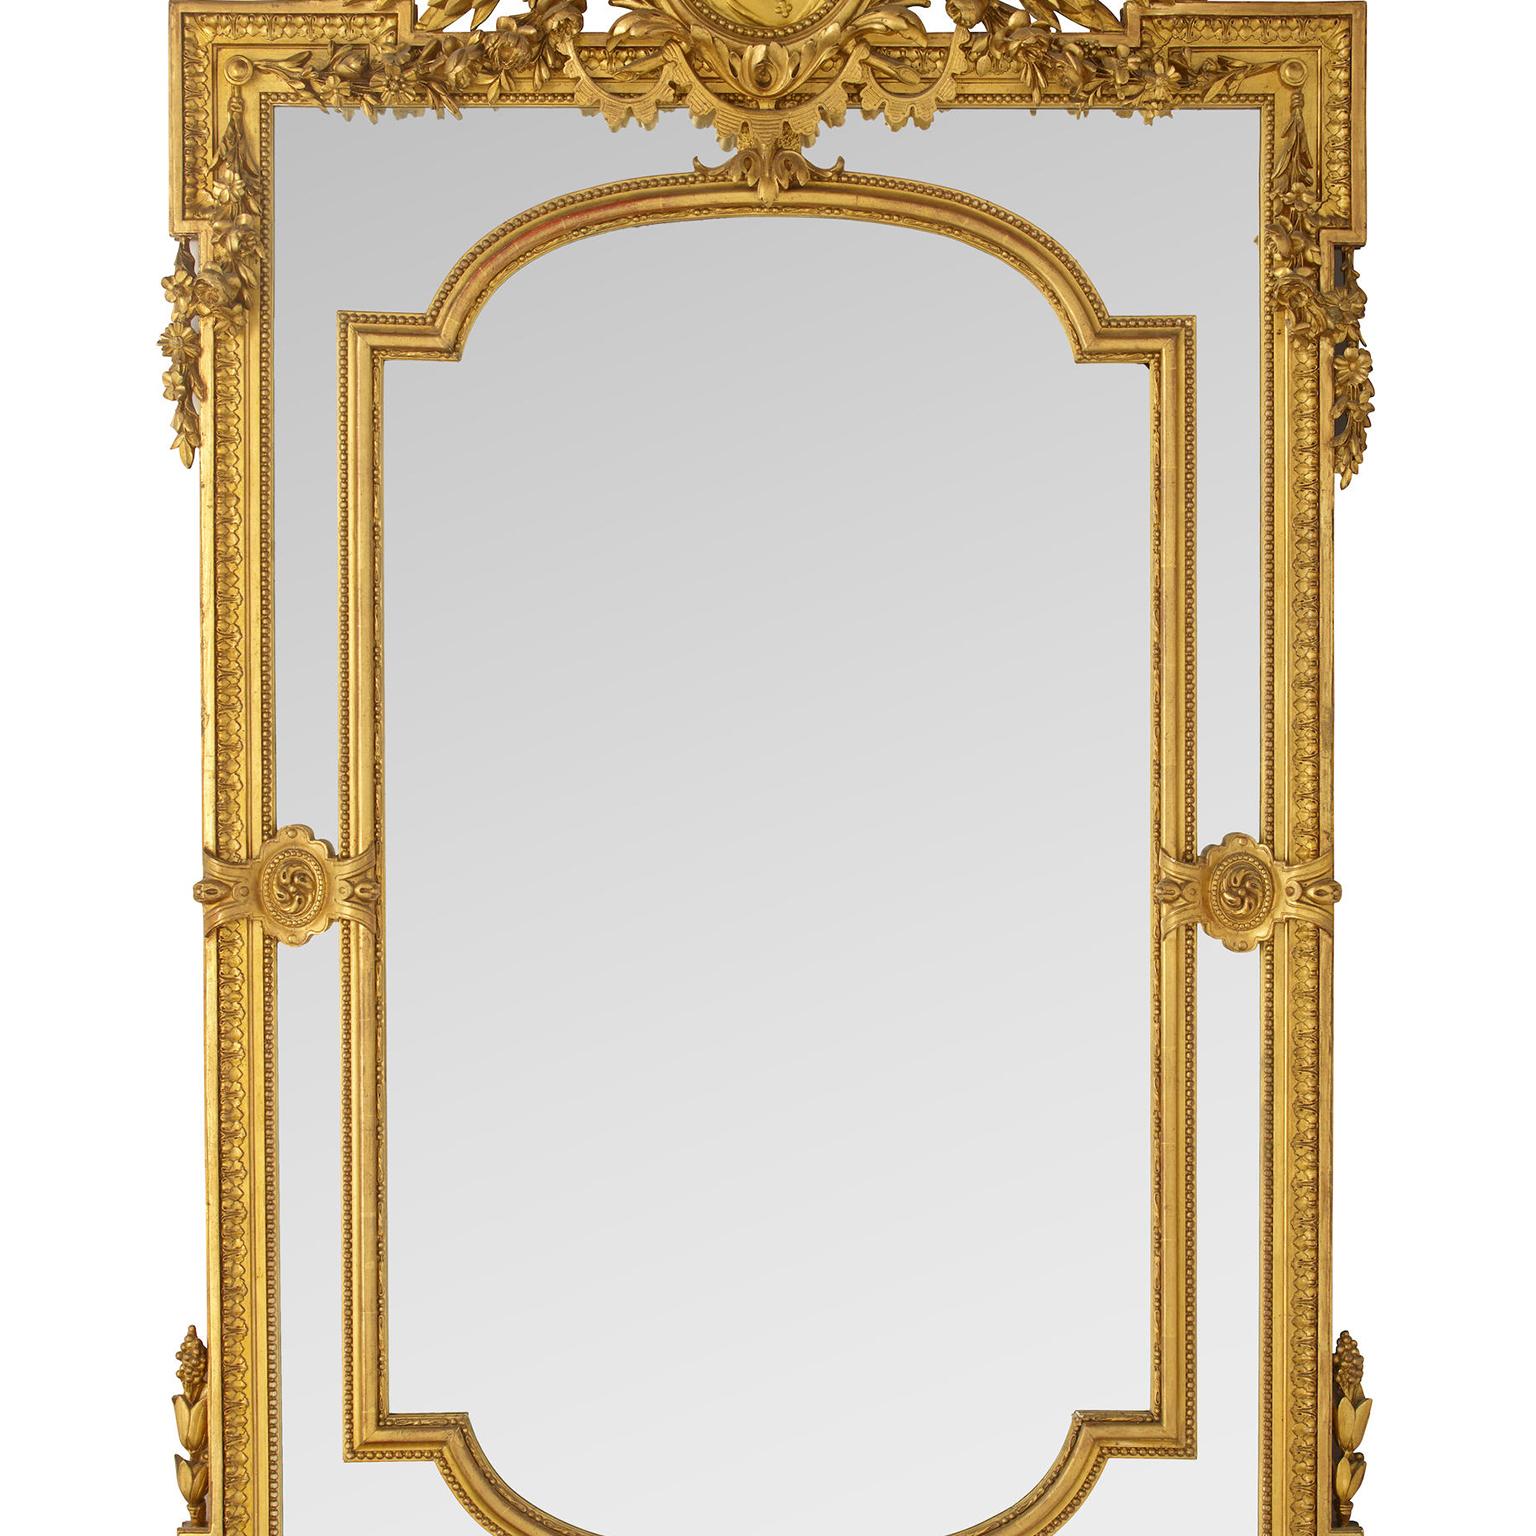 Early 20th Century French 19th Century Louis XVI Style Gilt-Wood and Gilt-Gesso Carved Pier Mirror For Sale